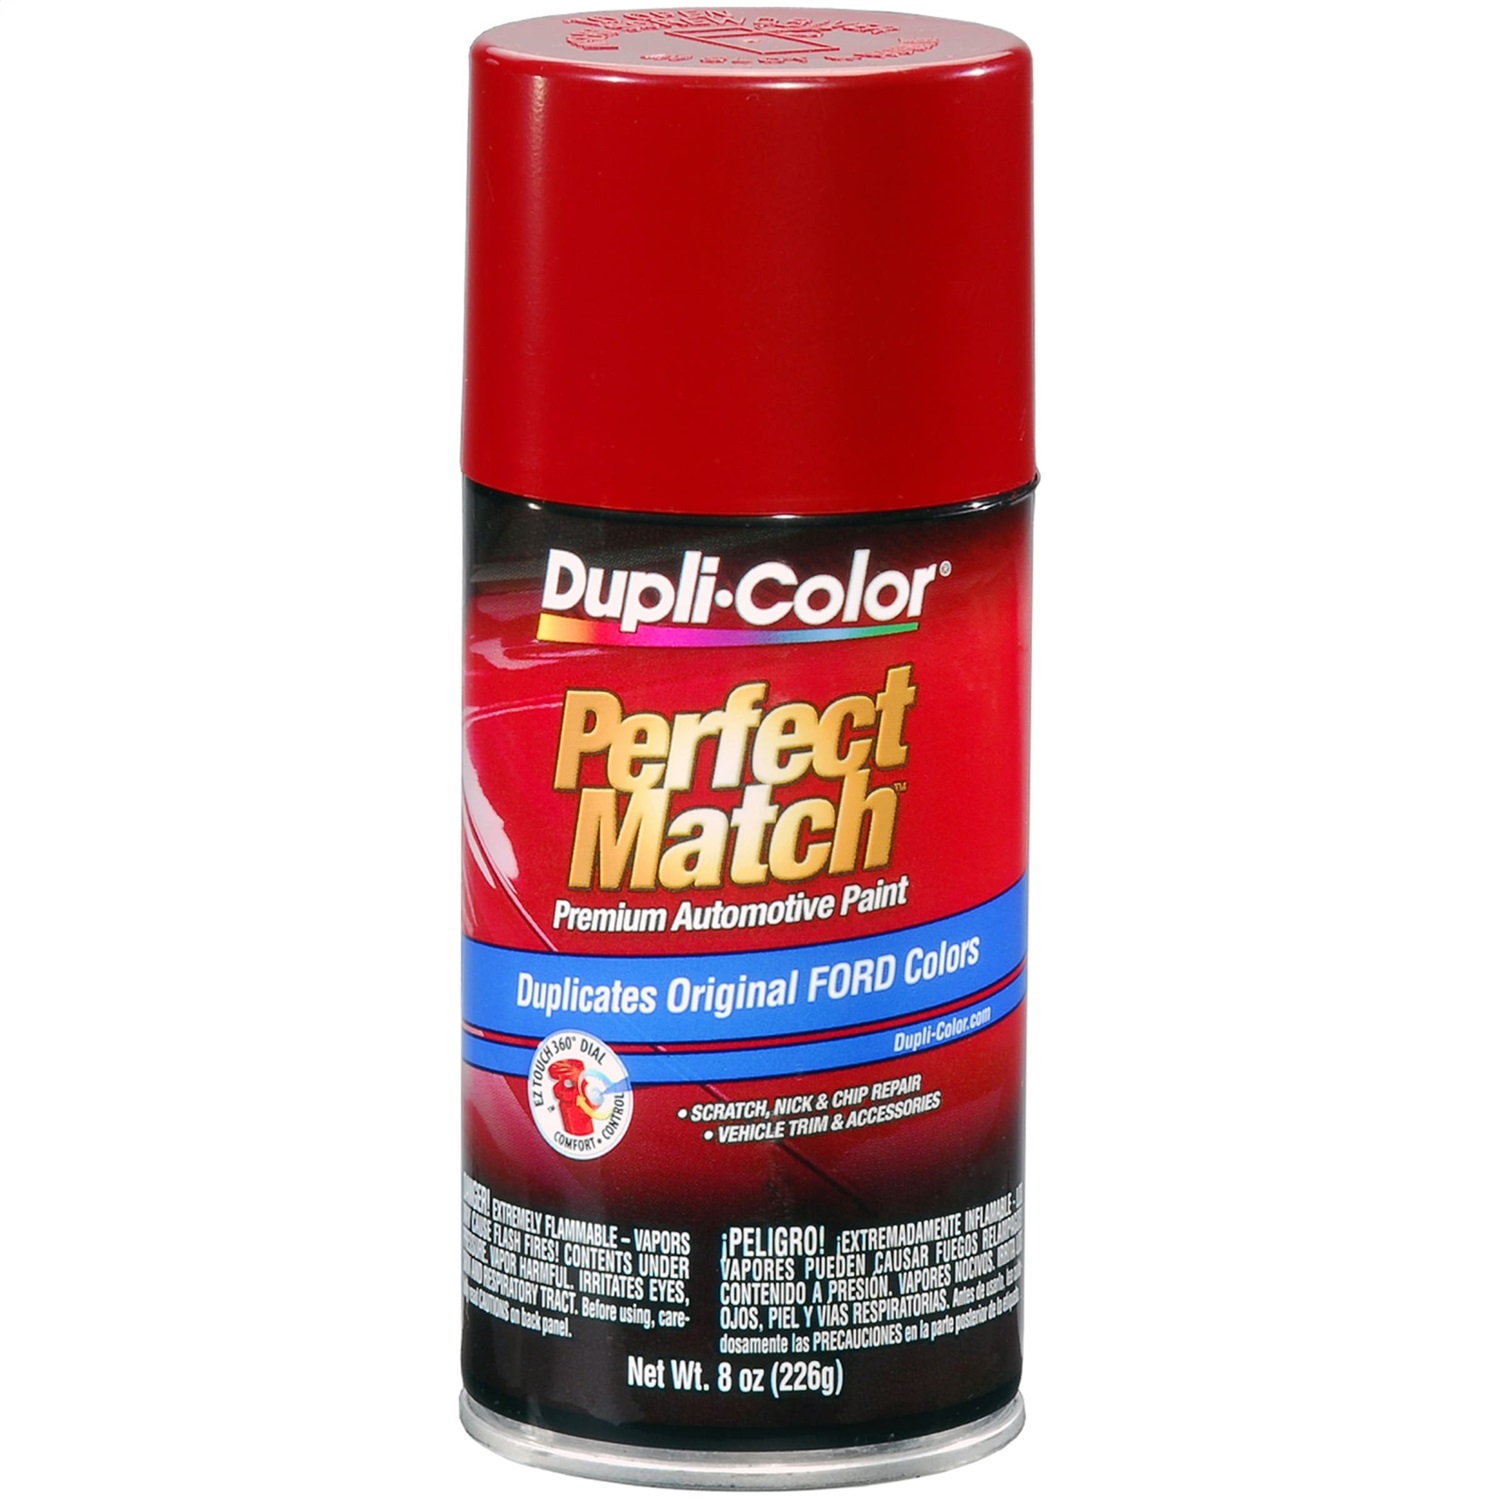 Dupli-Color EBFM01887 Perfect Match Automotive Spray Paint Ford Candy Apple Red, T/2K/EU ? 8 oz. Aerosol Can Fits select: 1985-1997 FORD F150, 1985-1997 FORD F250 - image 1 of 2